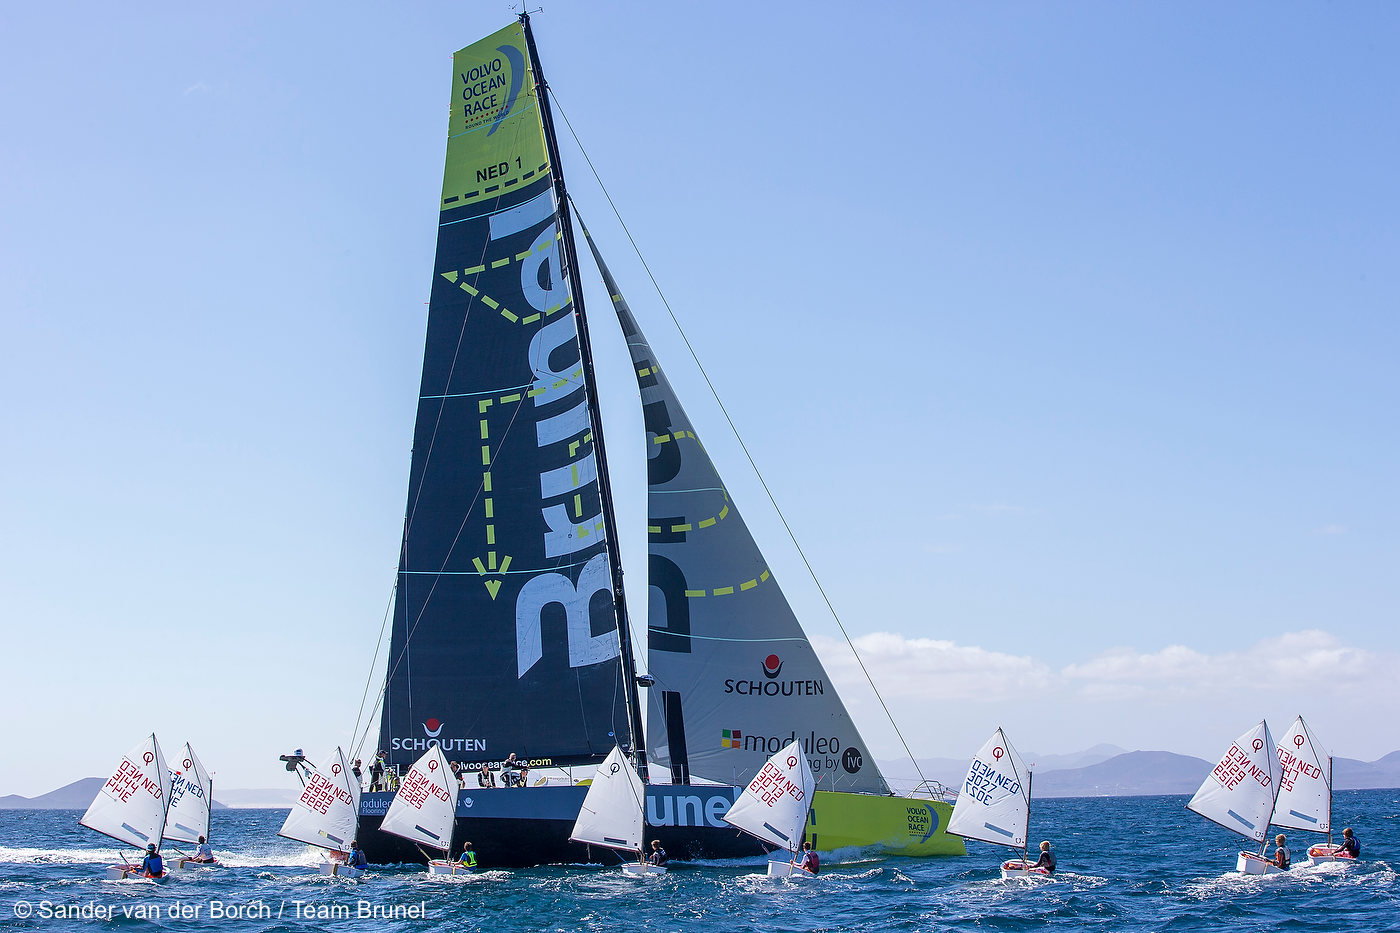 Team Brunel training, 1st of March 2014, Lanzarote, Spain